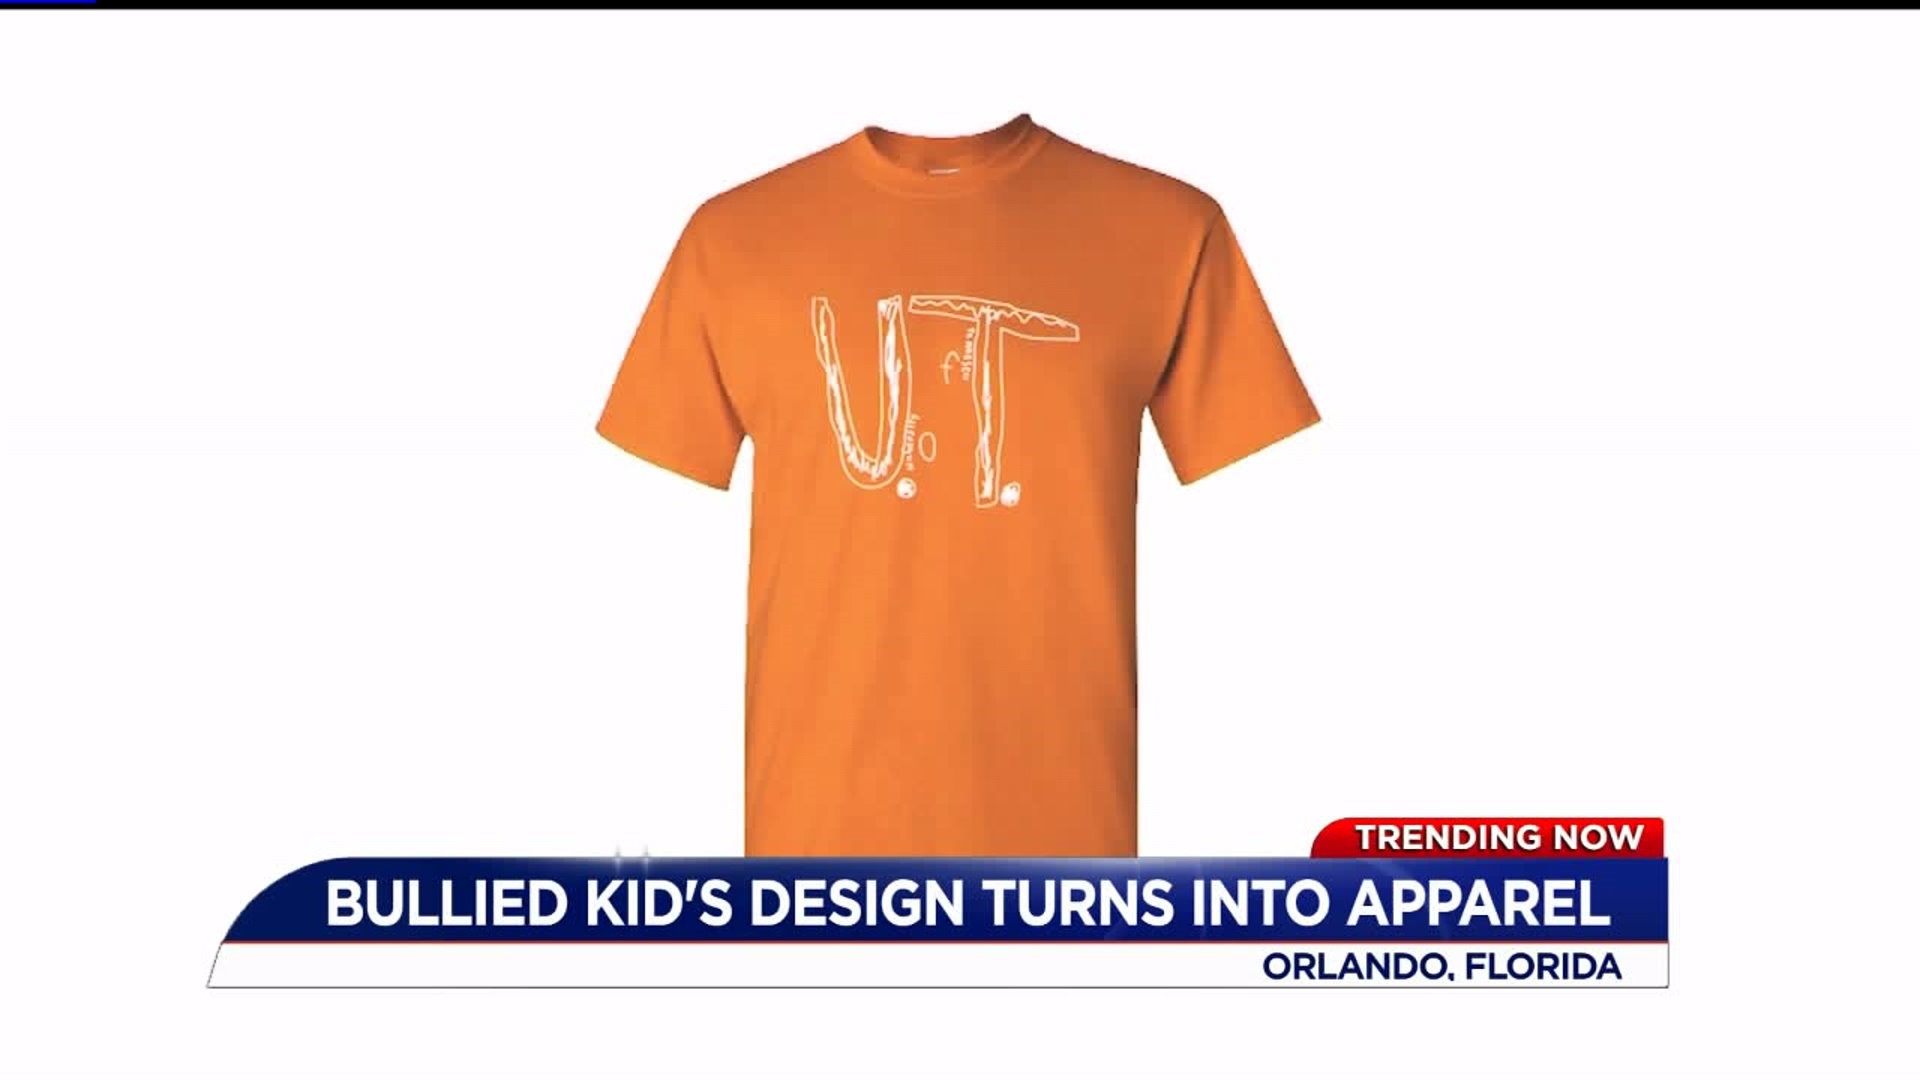 Tennessee Vols to sell boy`s homemade T-shirt design after he`s bullied at school